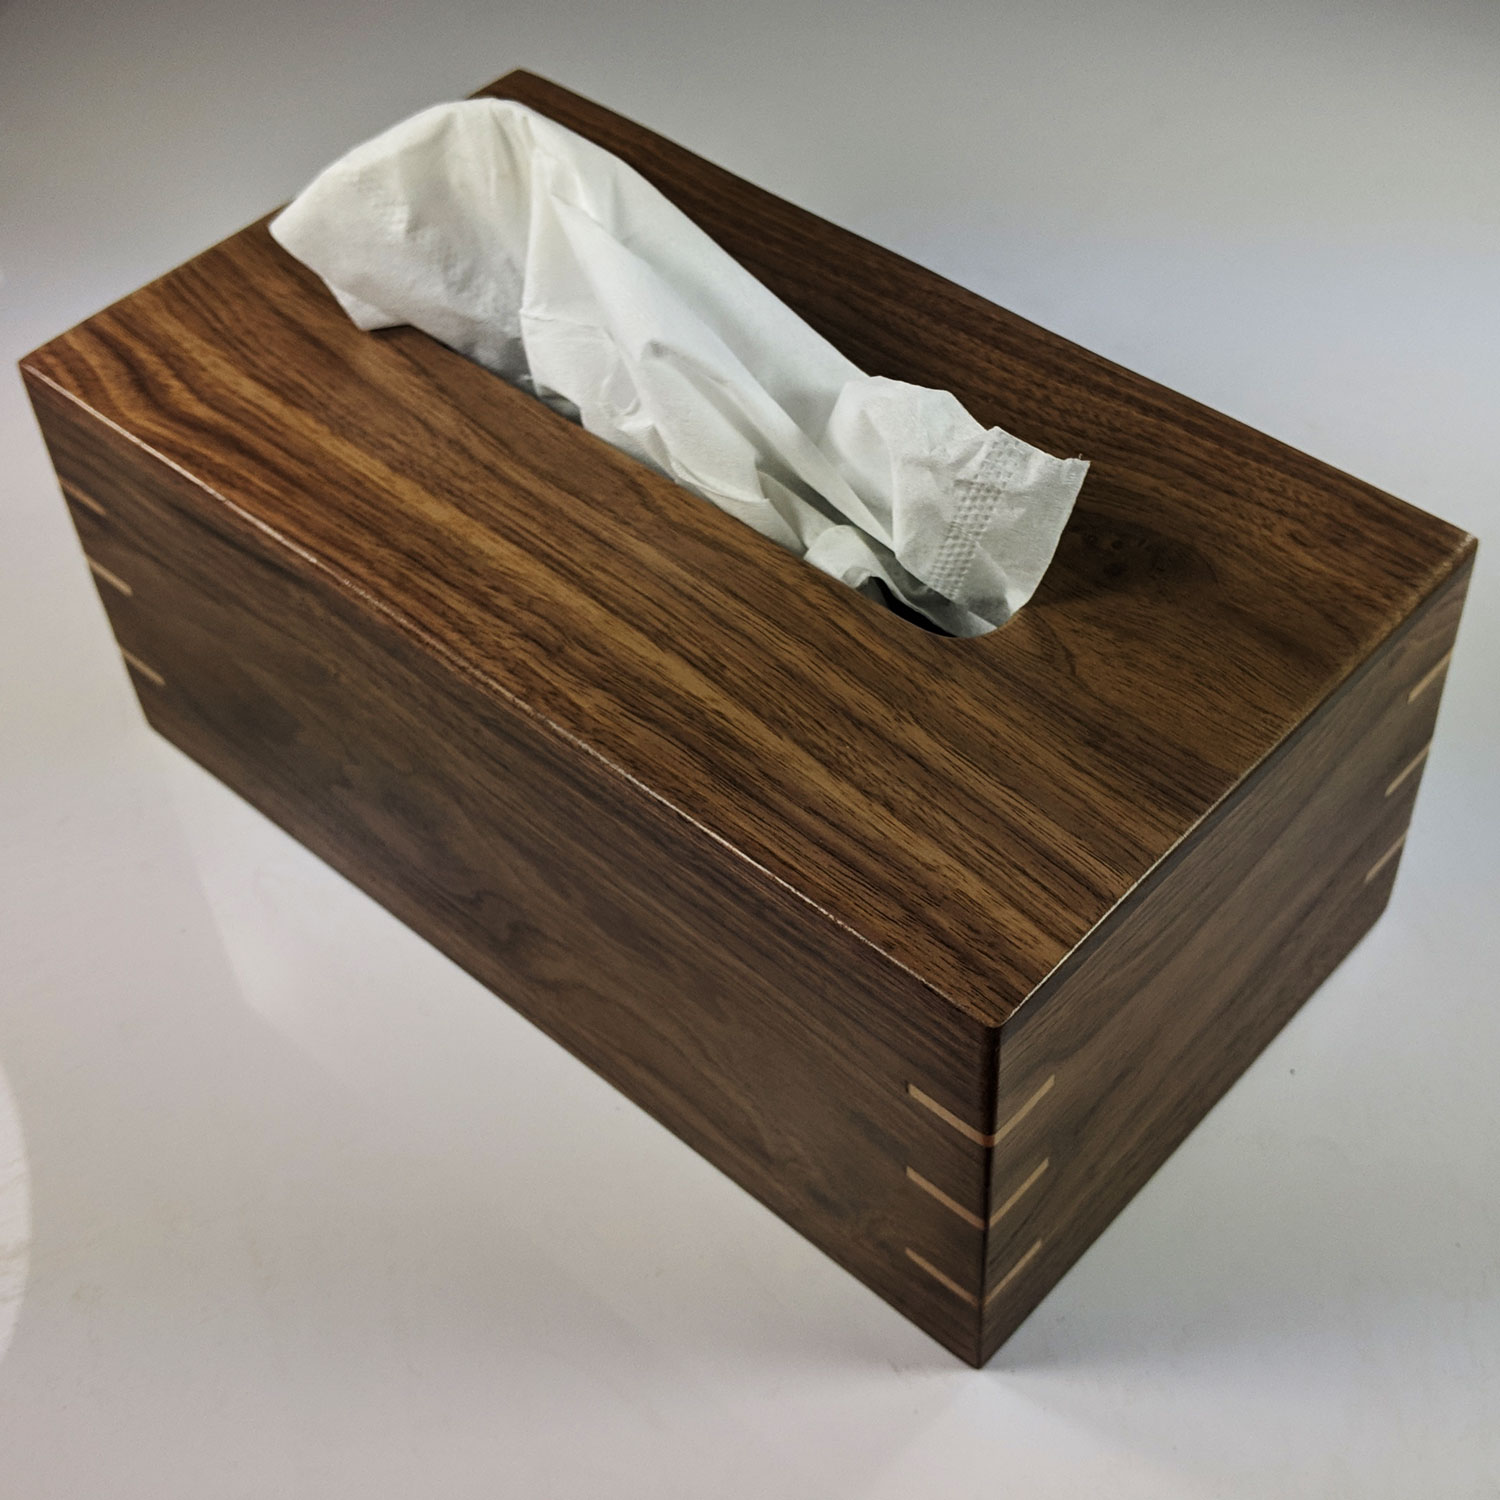 Solid Texas Black Walnut - Handmade Tissue / Kleenex Box Cover Holder -  Rectangle Style - Box Jointed Sides - Oak Knoll Woodworks